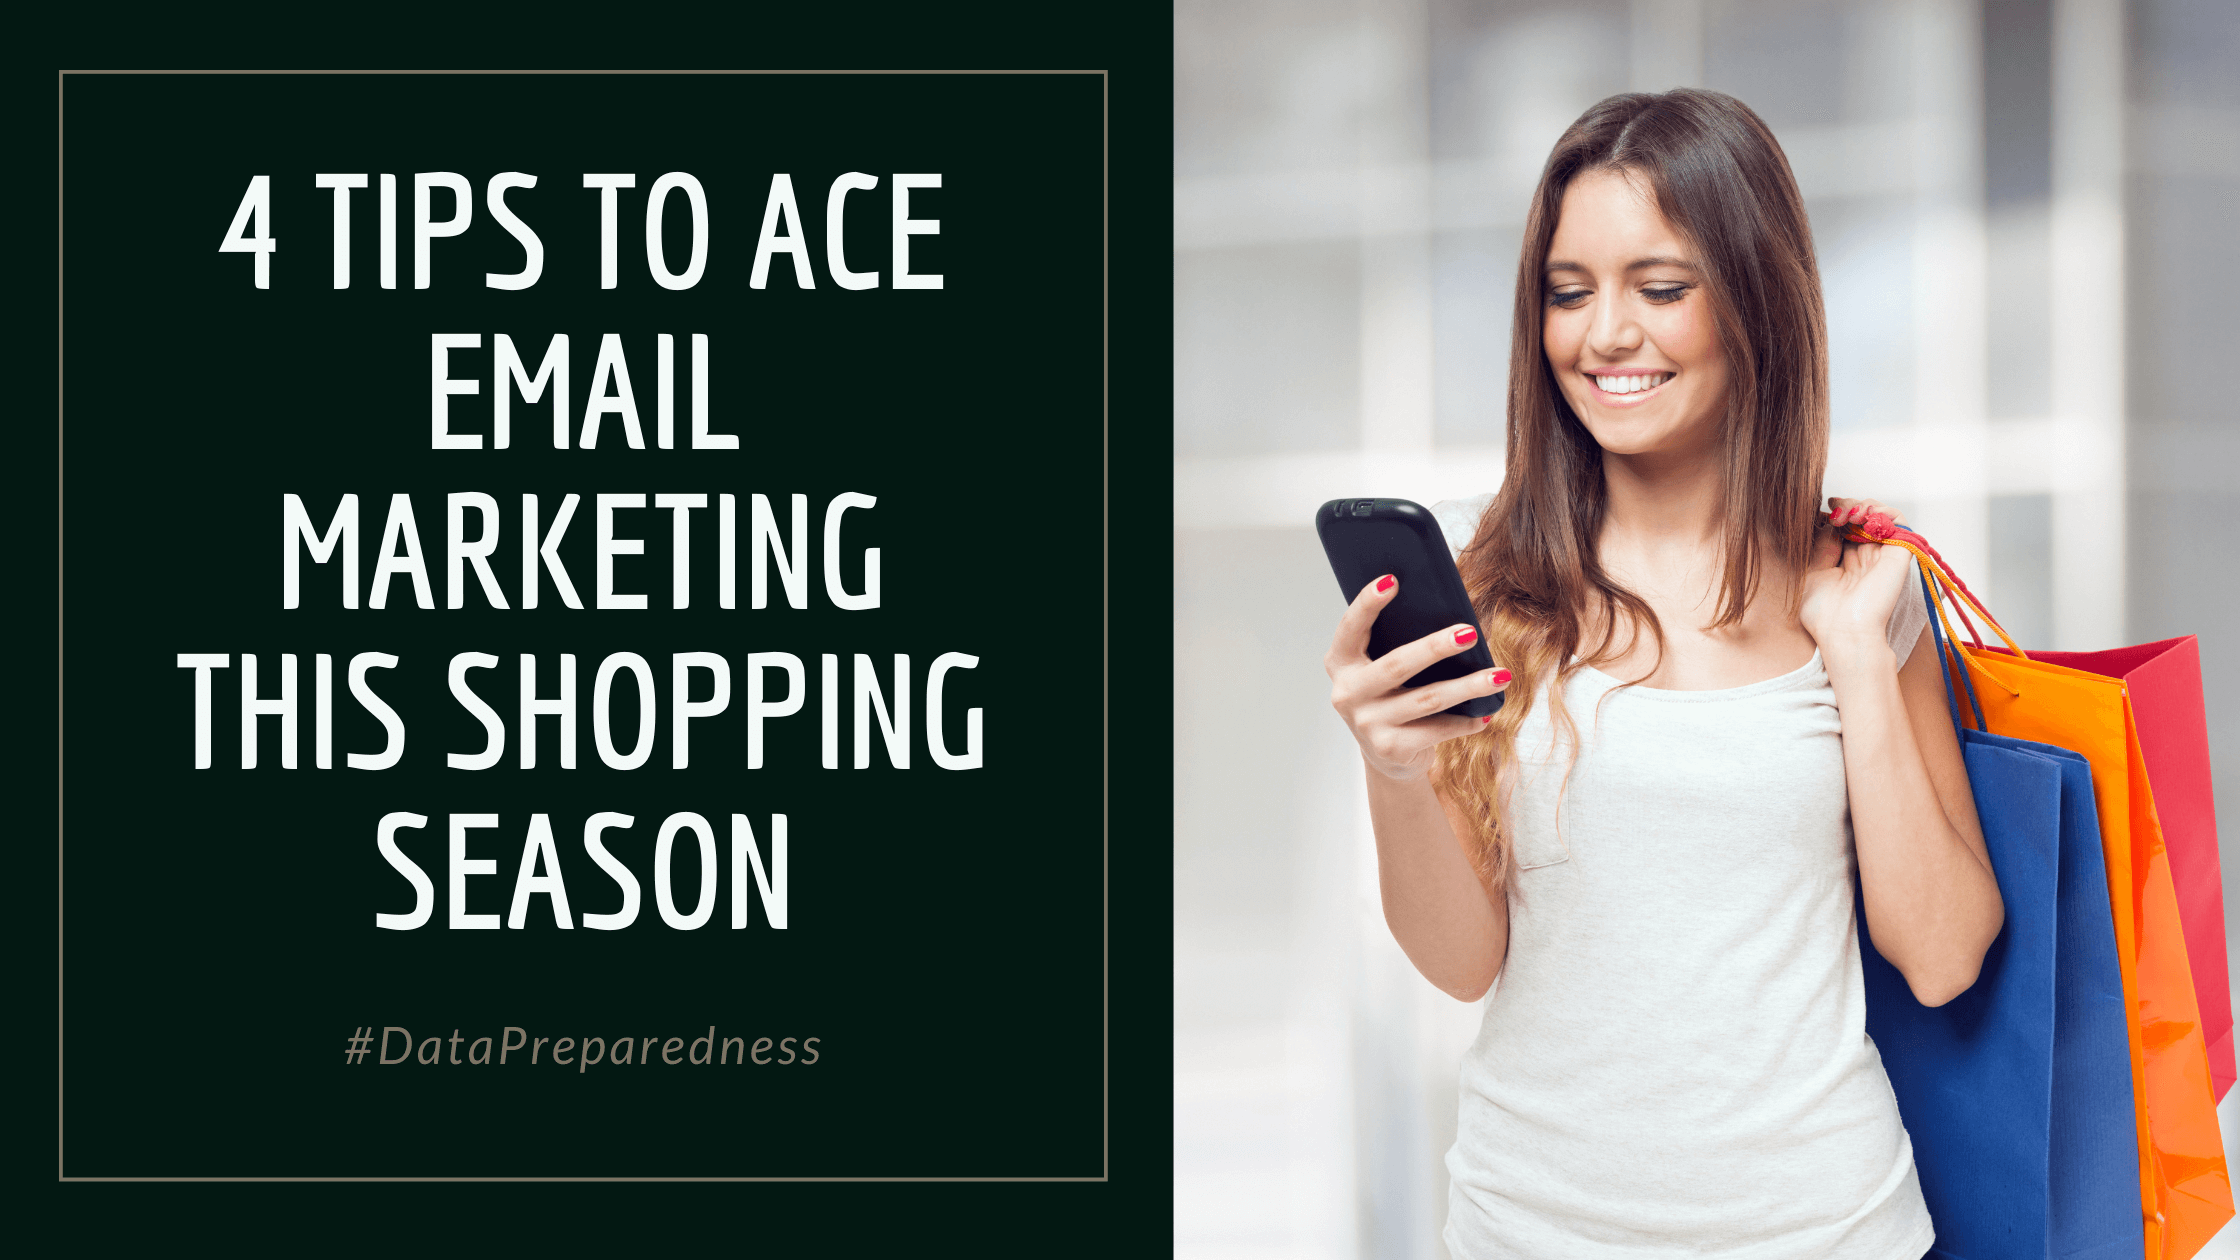 4 tips to ace email marketing this shopping season